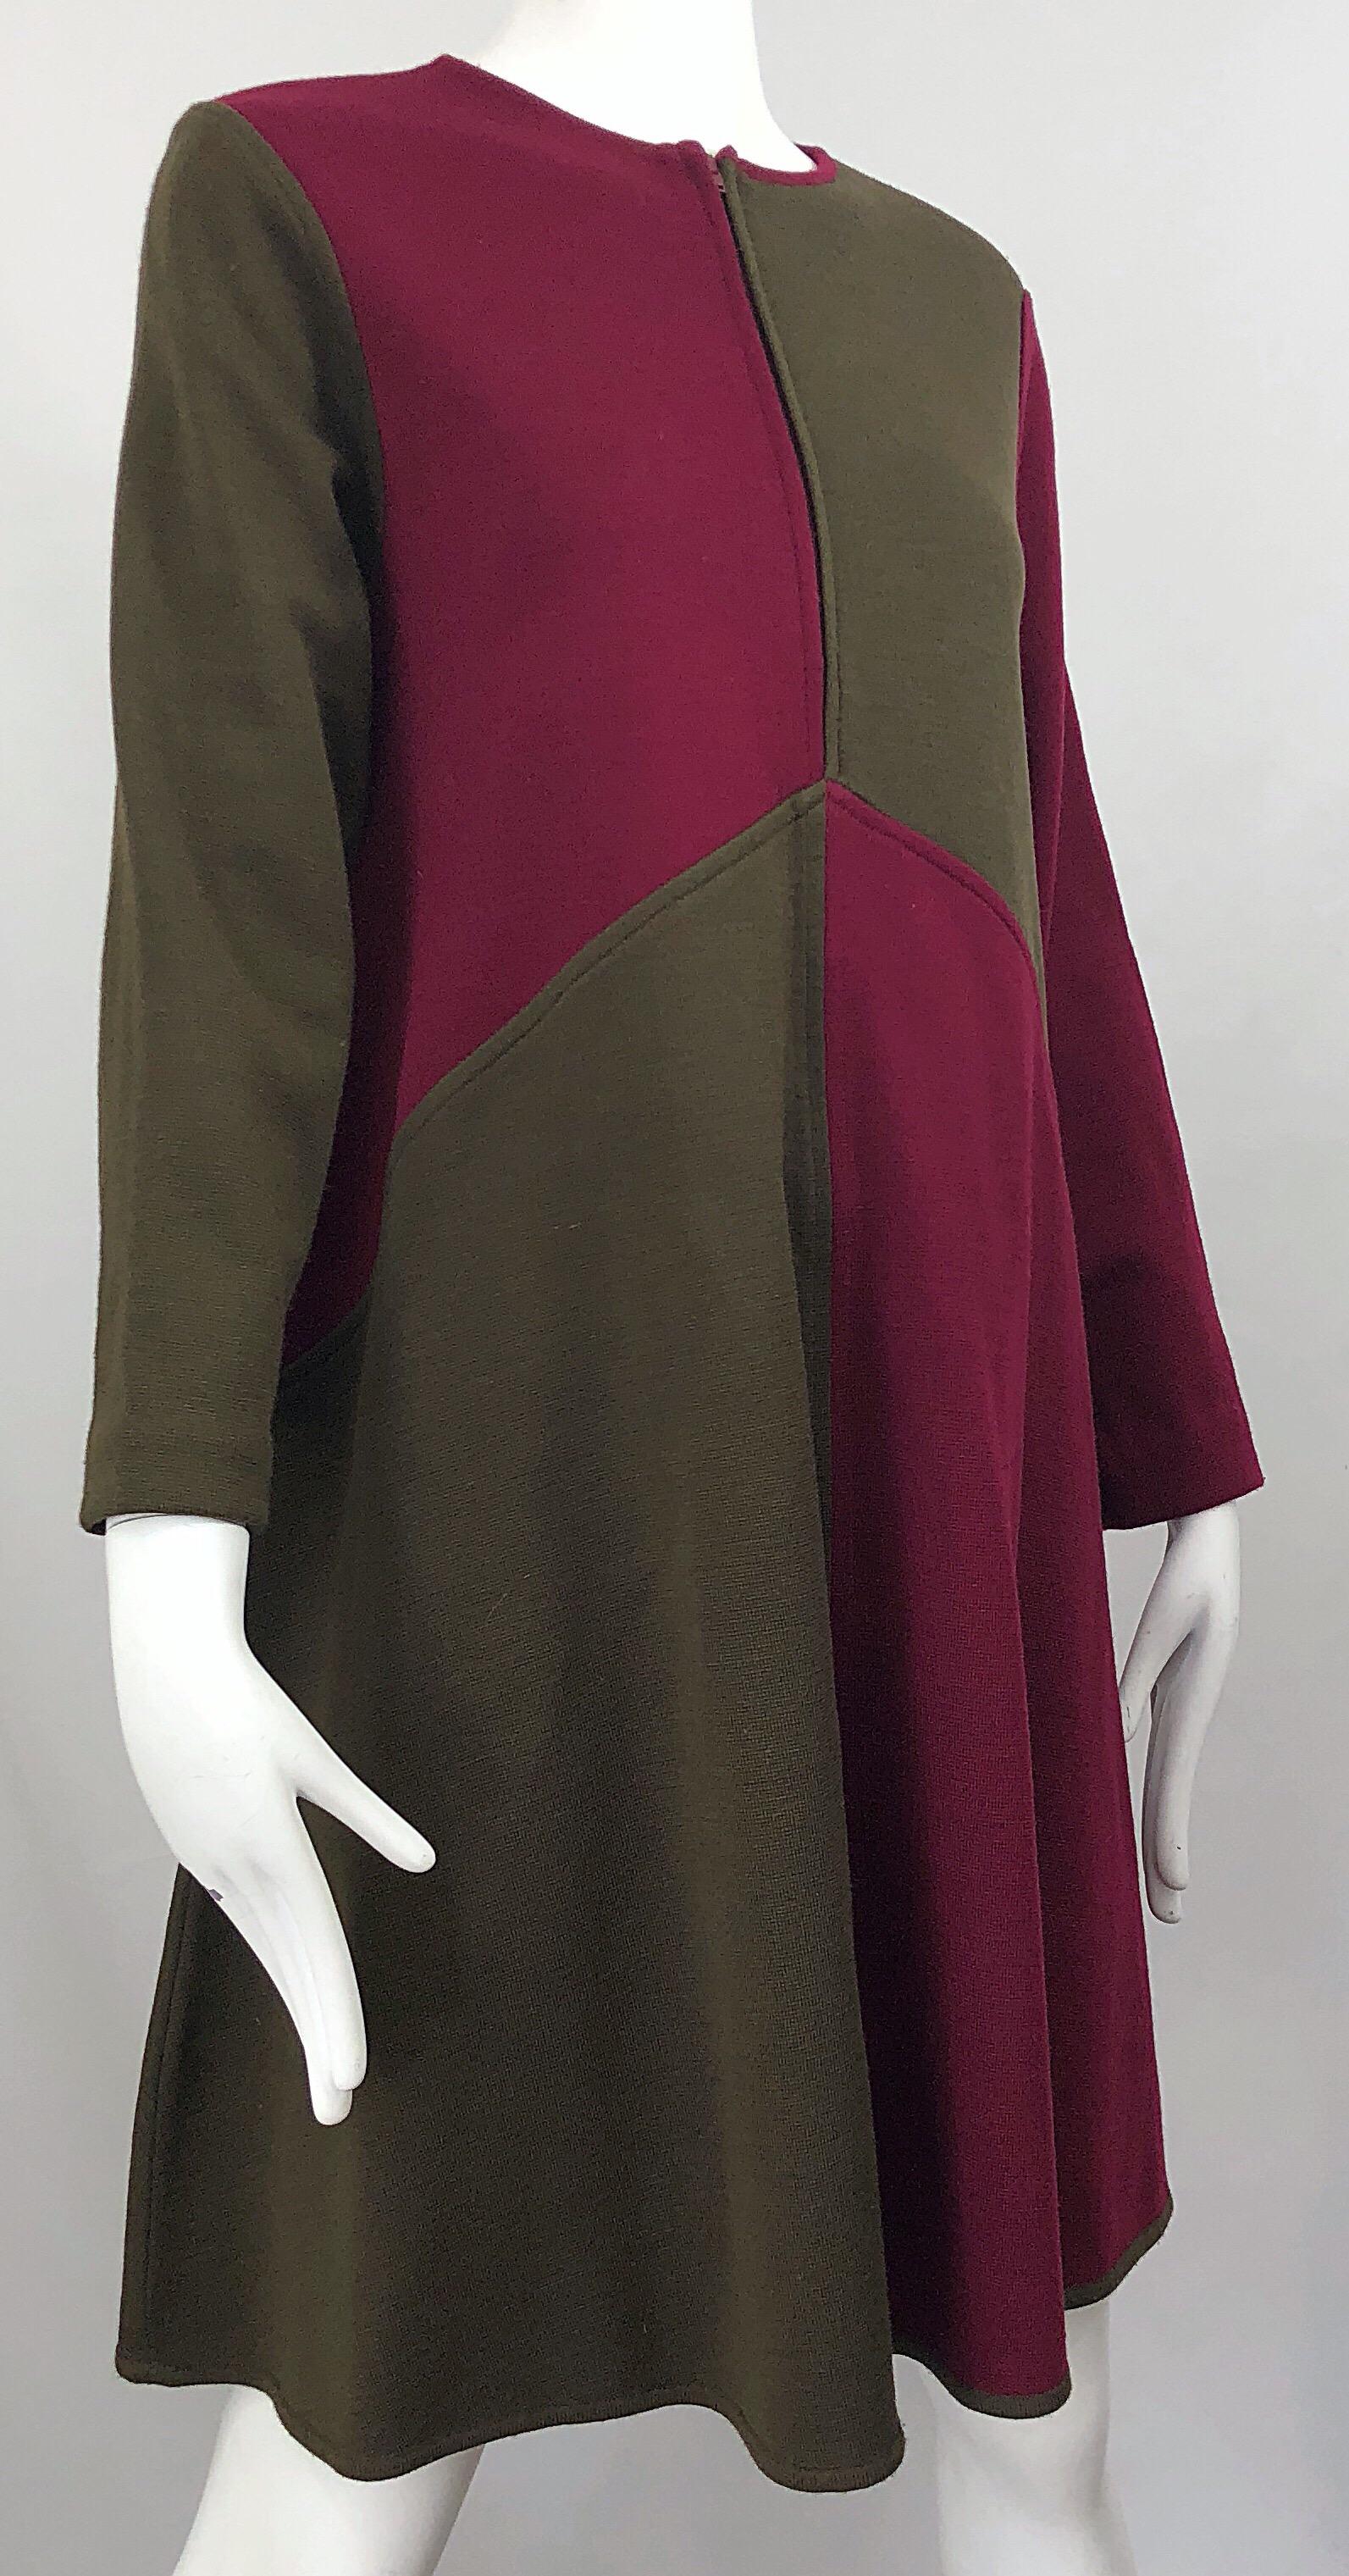 Vintage Harve Benard 1960s Style Maroon Burgundy + Brown Knit Wool Swing Dress In Excellent Condition For Sale In San Diego, CA